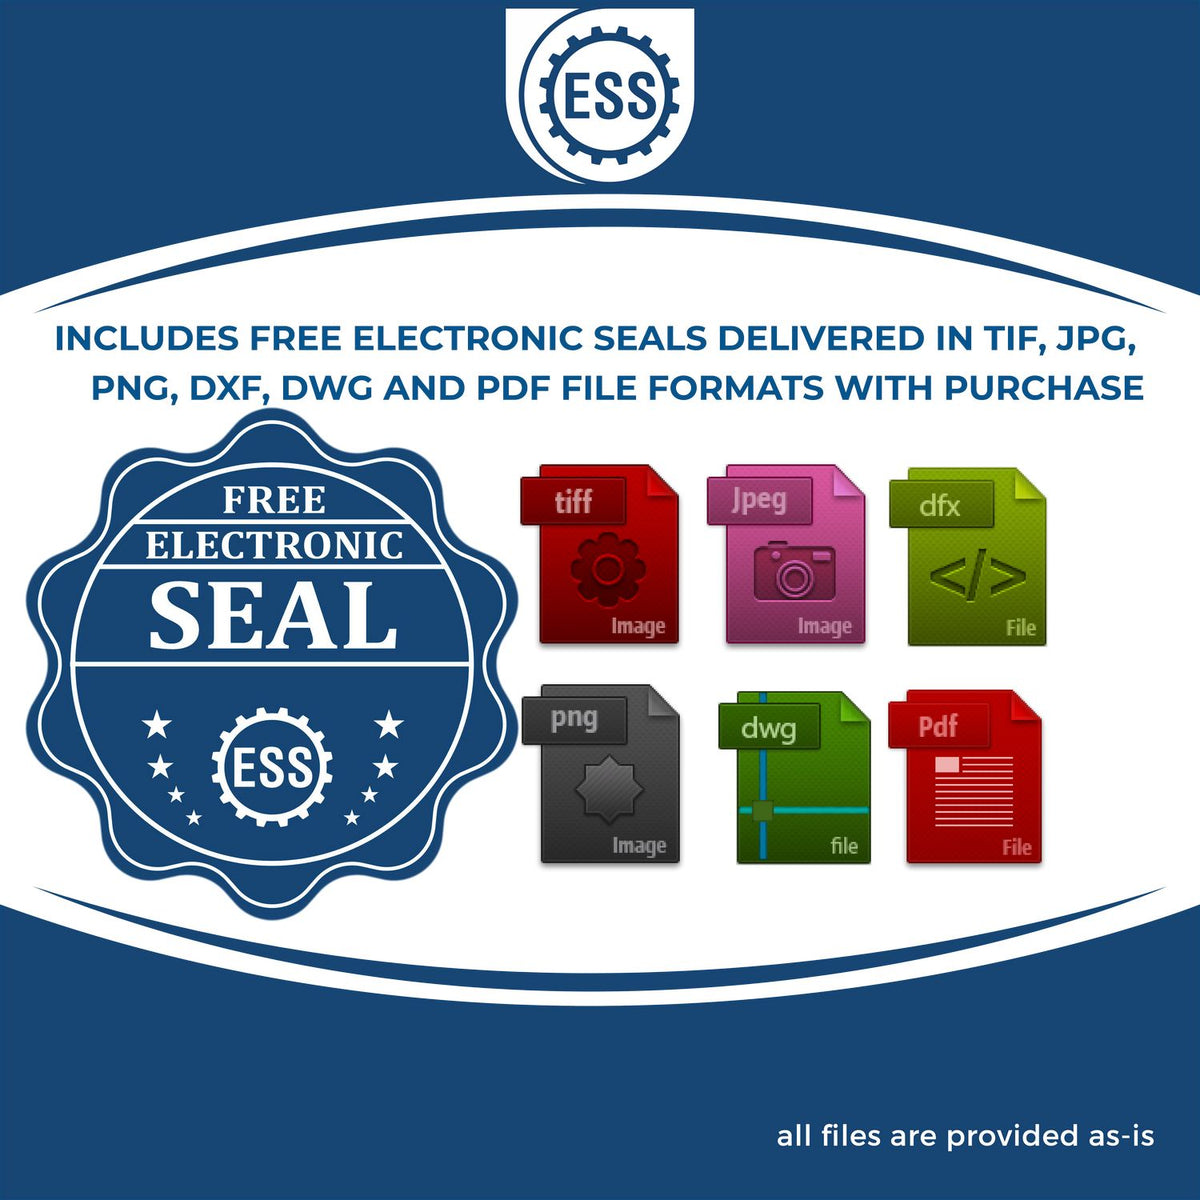 An infographic for the free electronic seal for the MaxLight Premium Pre-Inked Texas State Seal Notarial Stamp illustrating the different file type icons such as DXF, DWG, TIF, JPG and PNG.